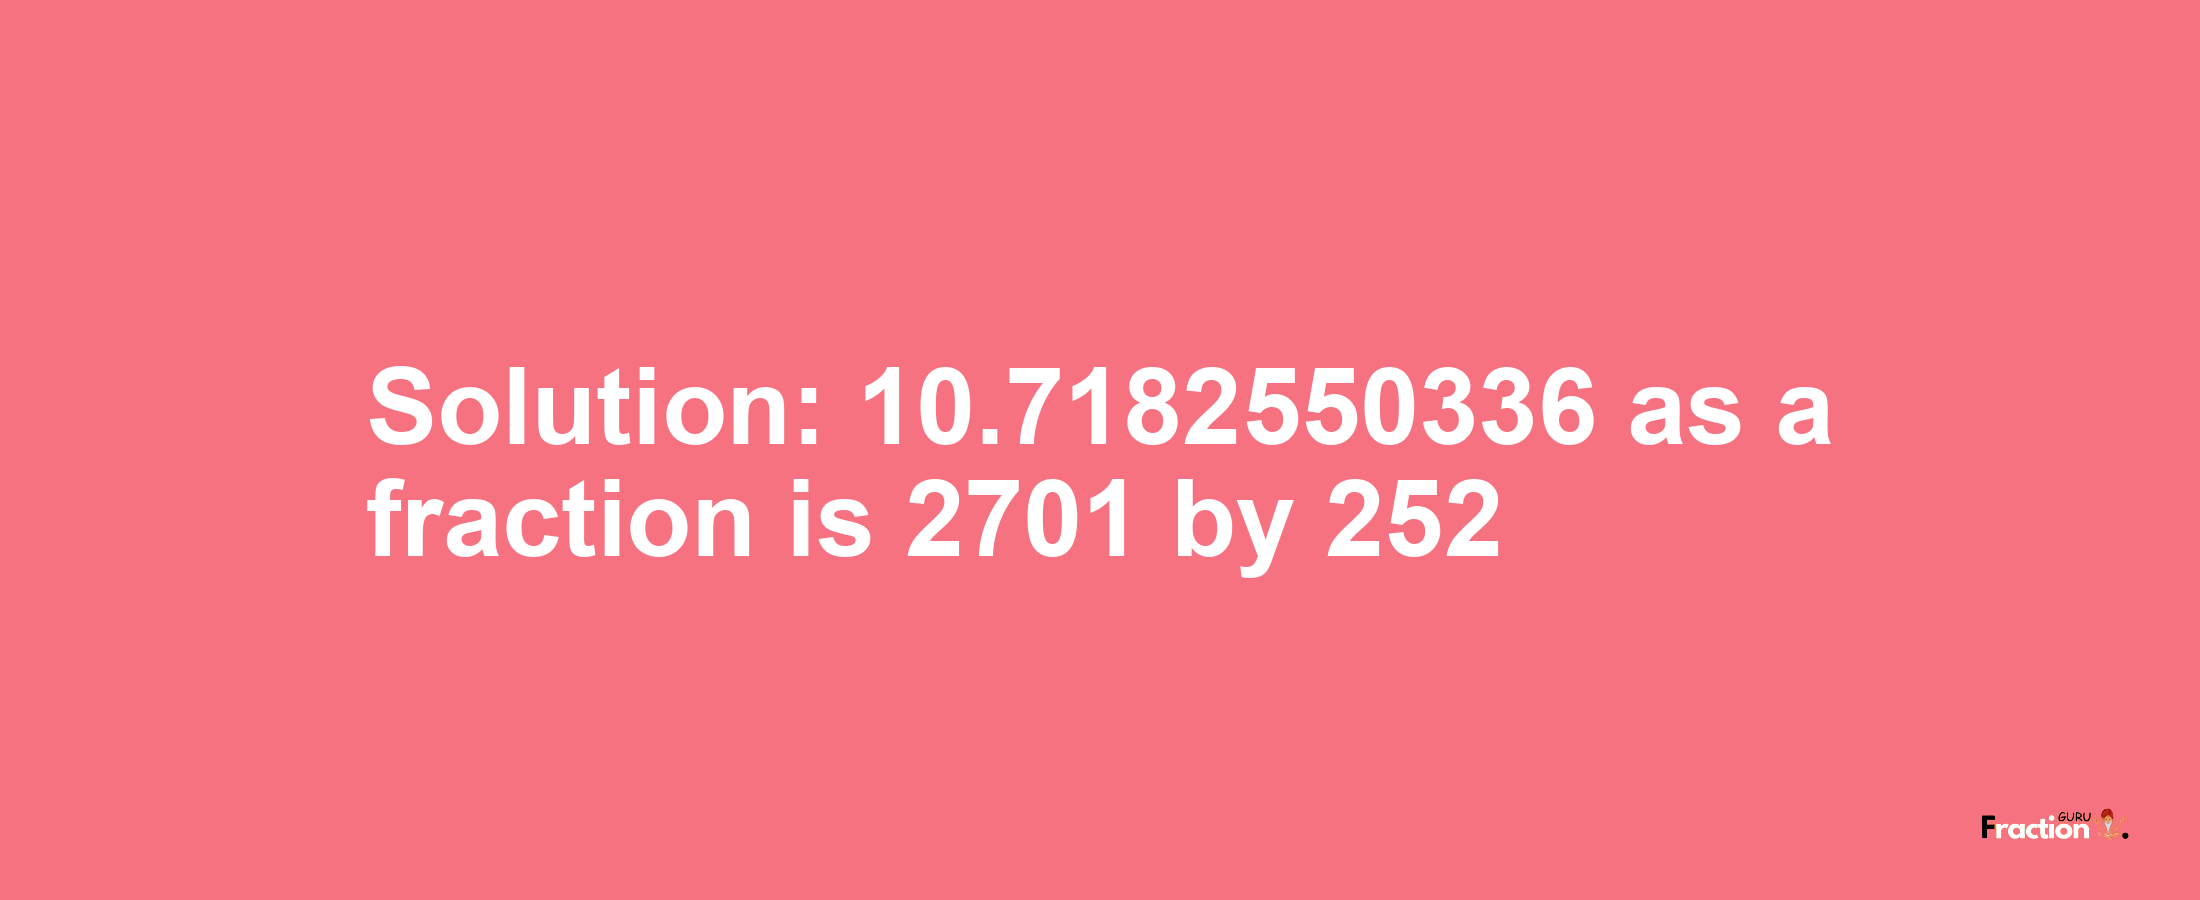 Solution:10.7182550336 as a fraction is 2701/252